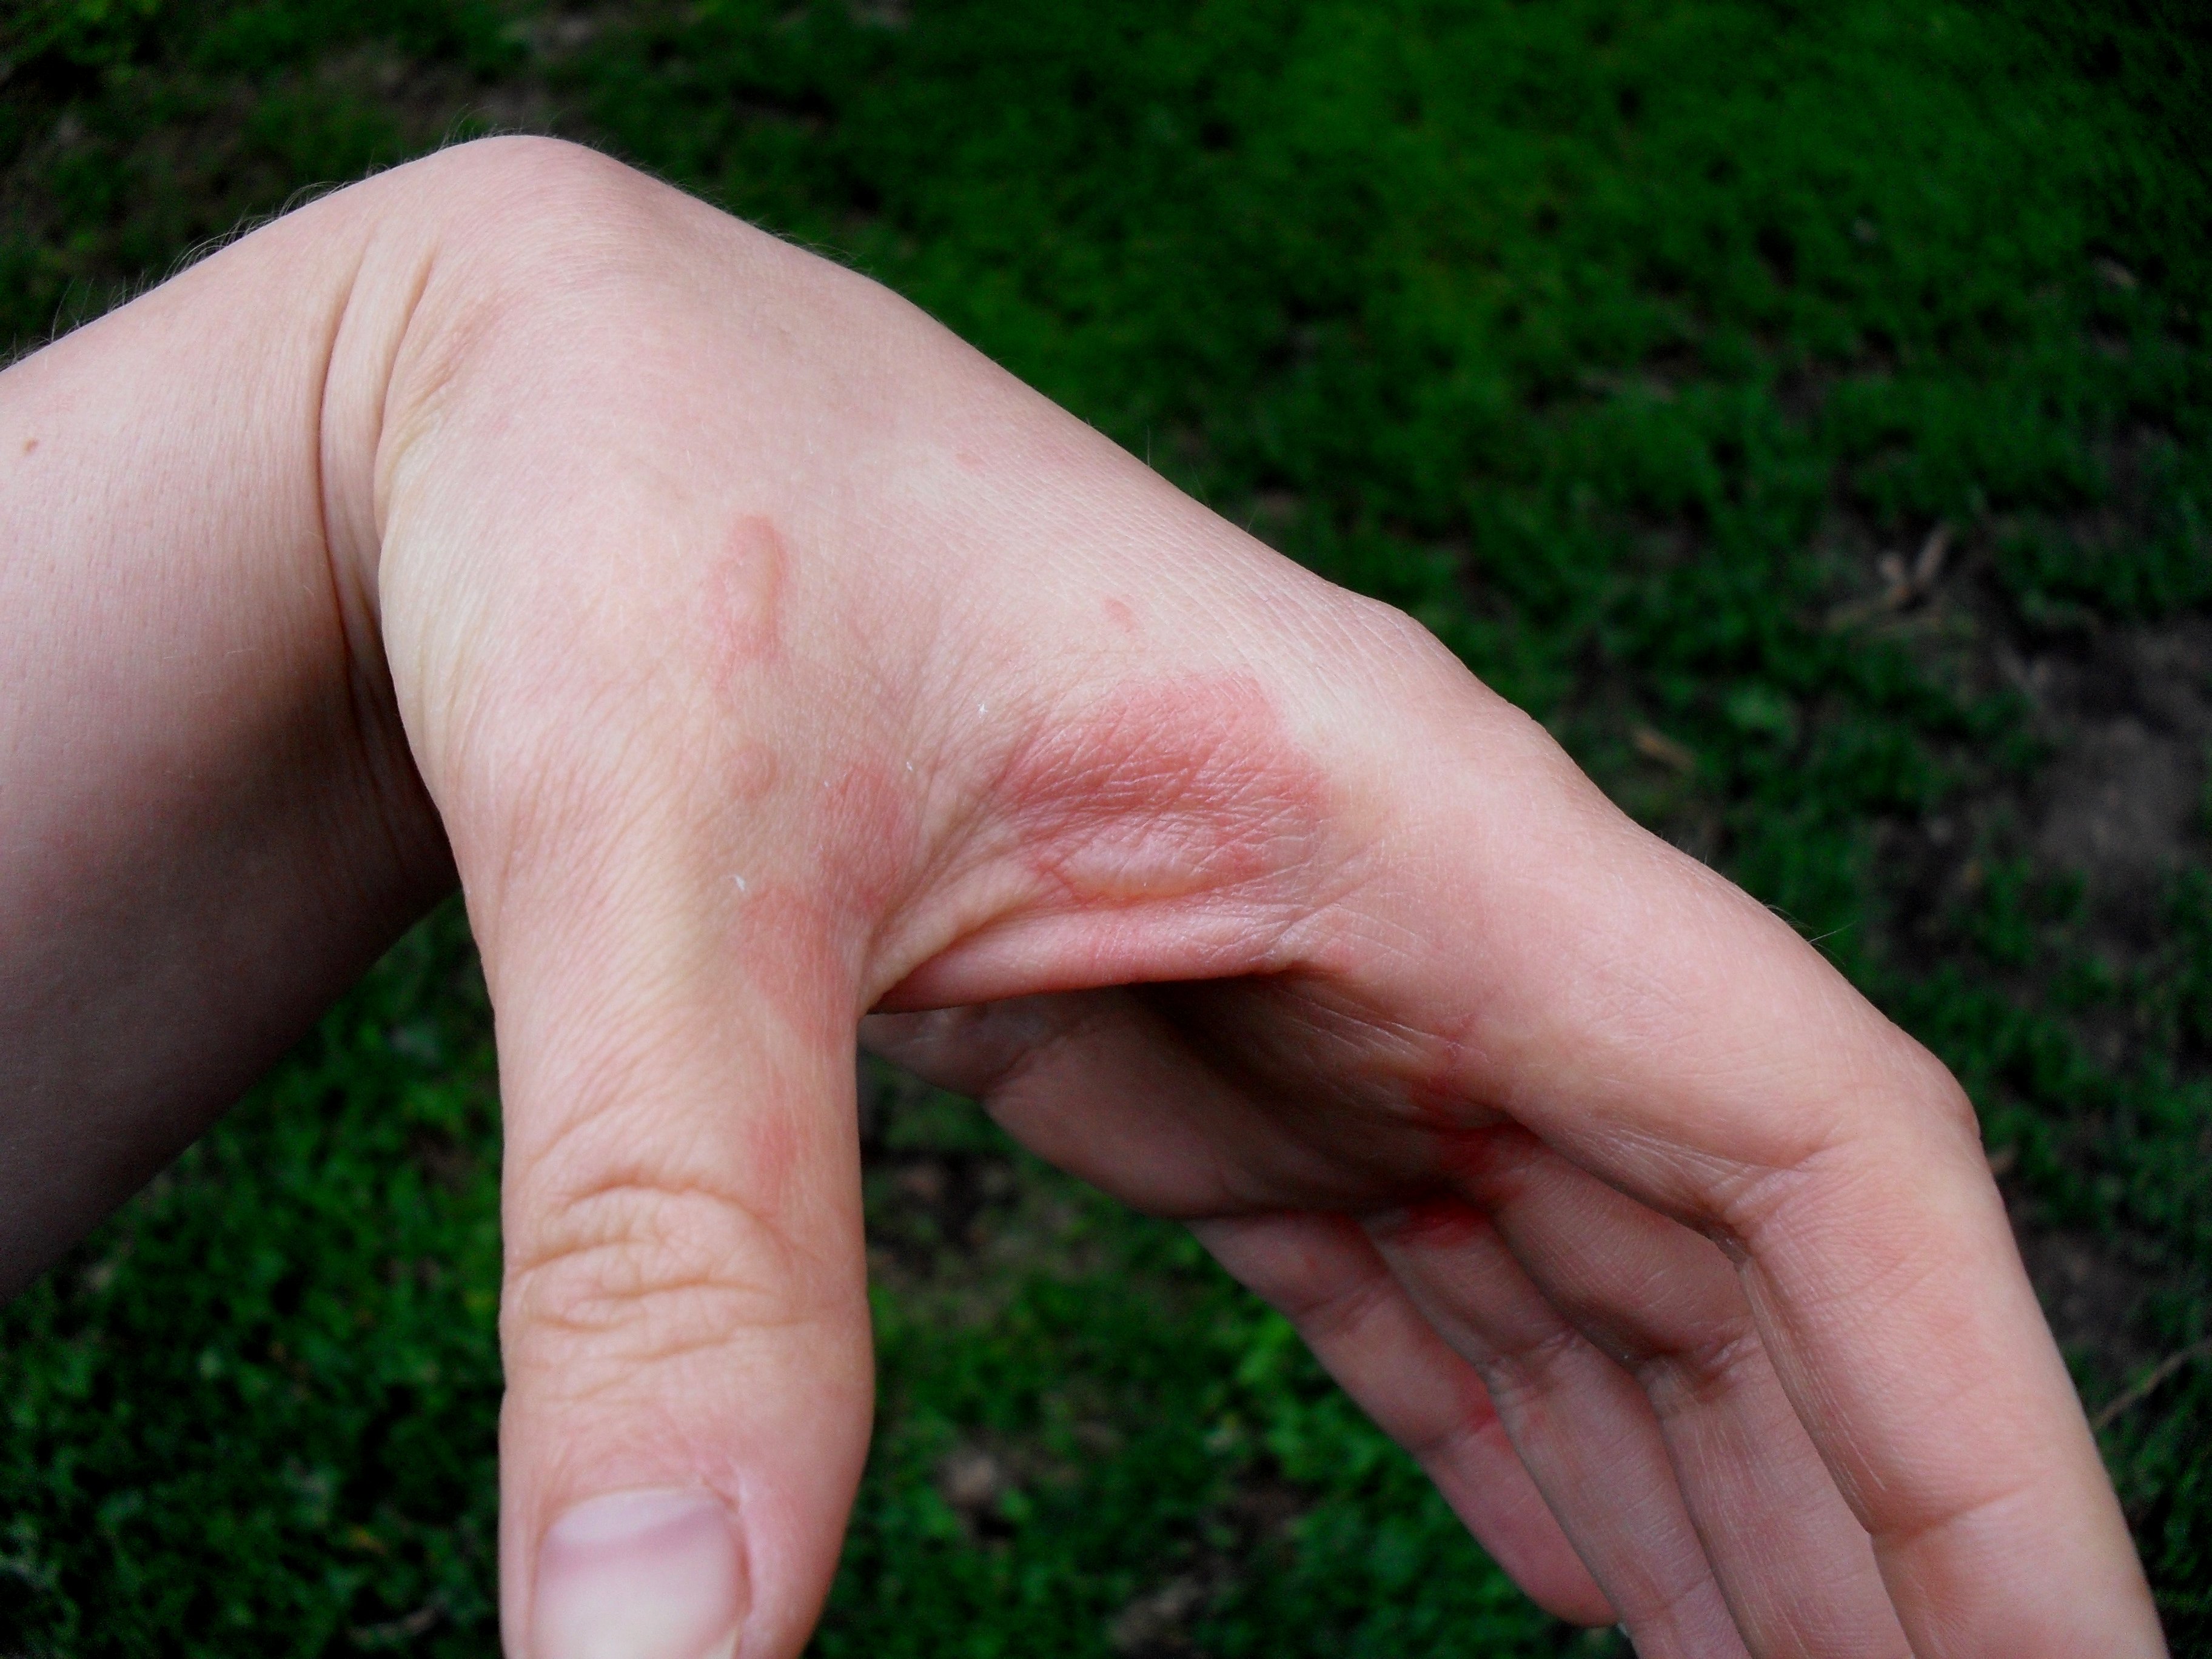 Sign you might Burn your hands. Burned hand